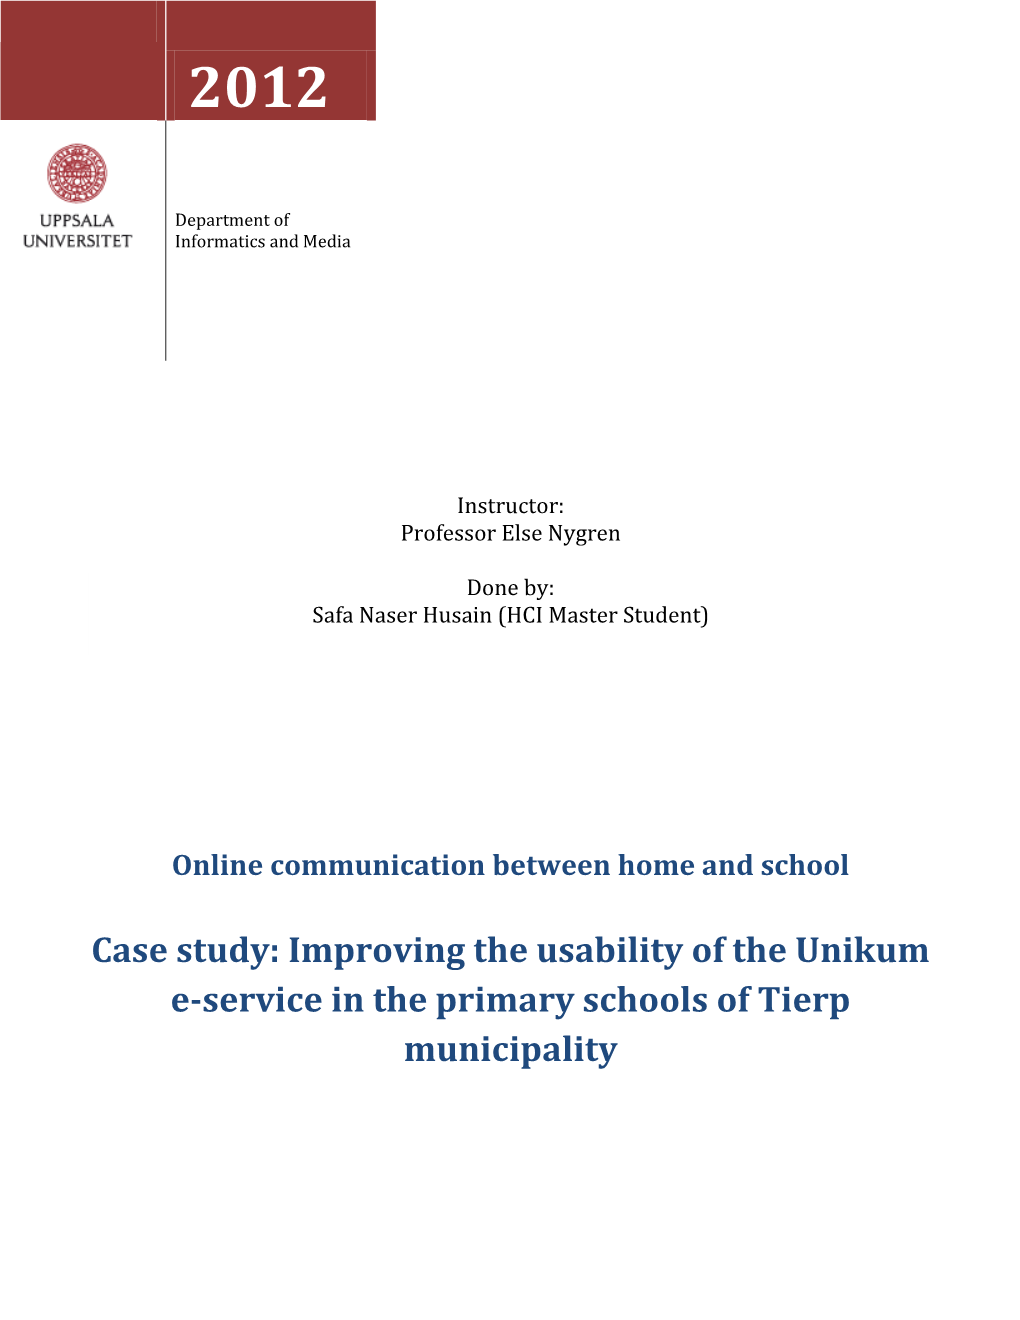 Online Communication Between Home and School. Case Study